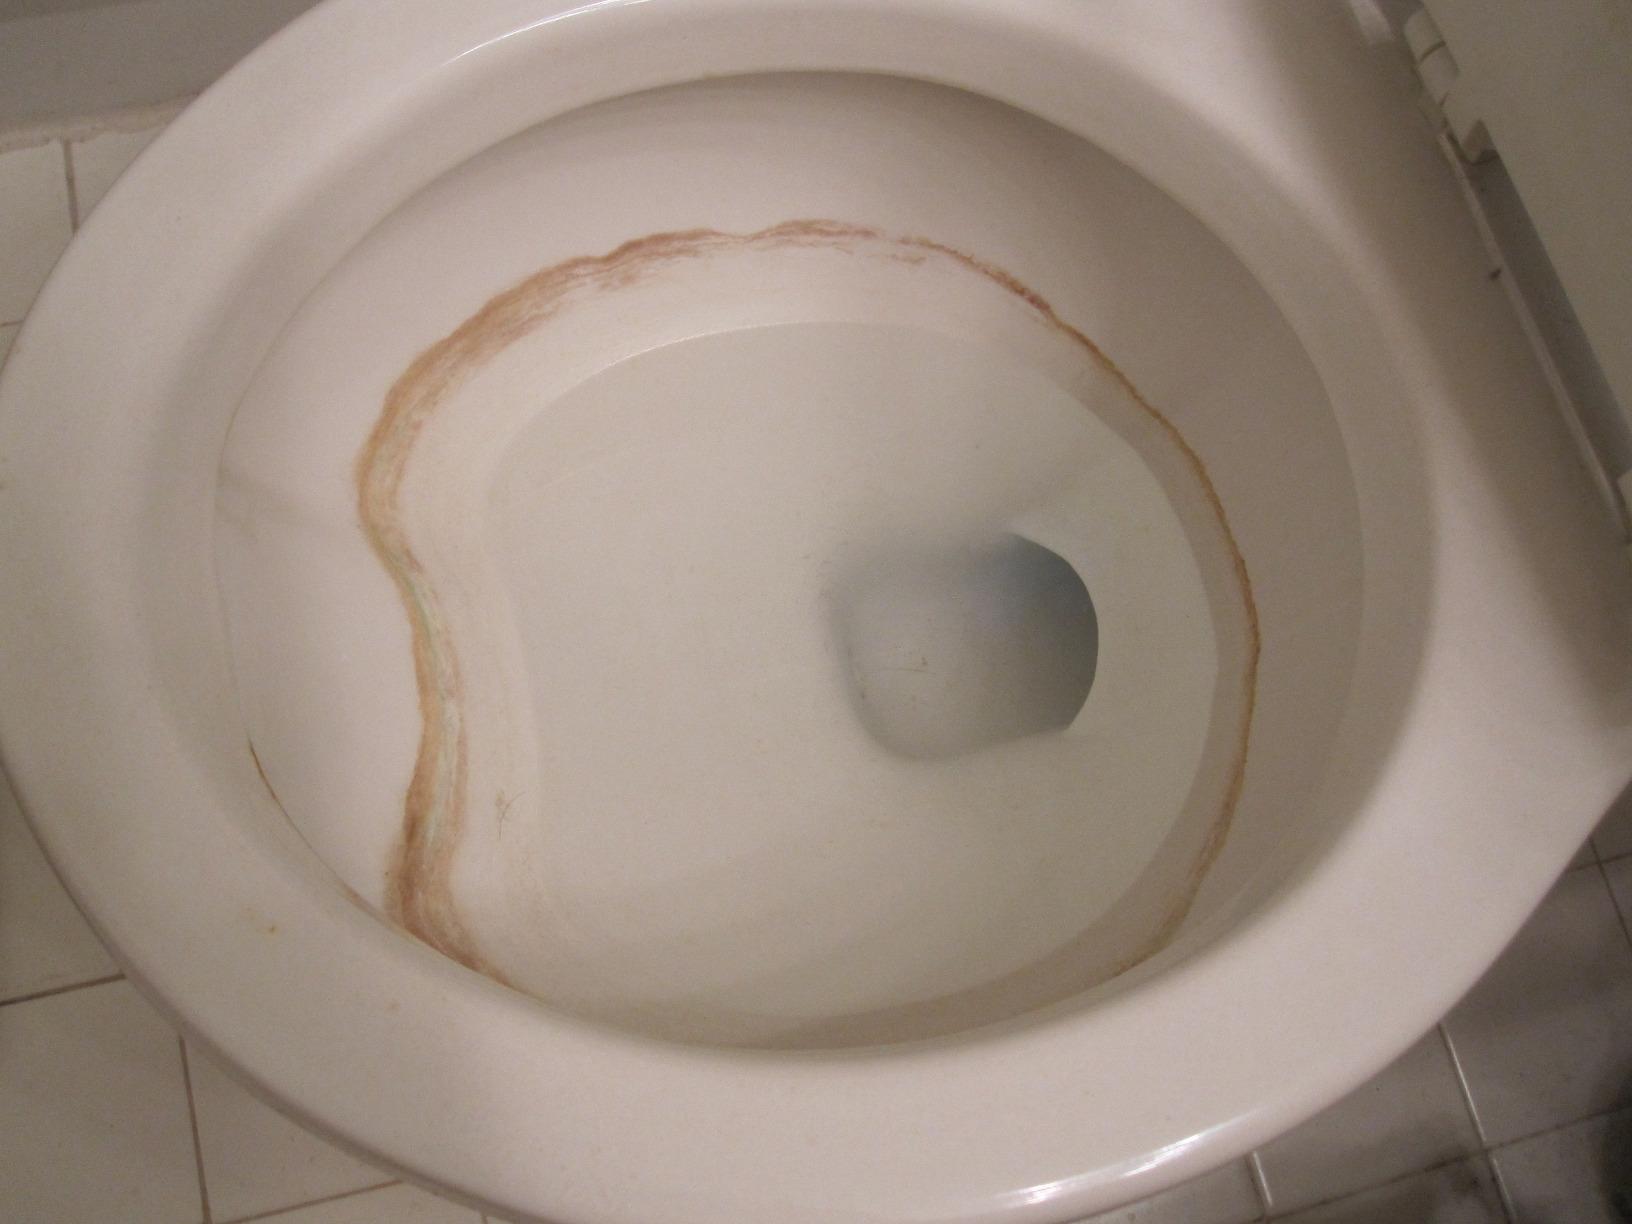 This is Why You Shouldn't Use Drano in Your Toilet 